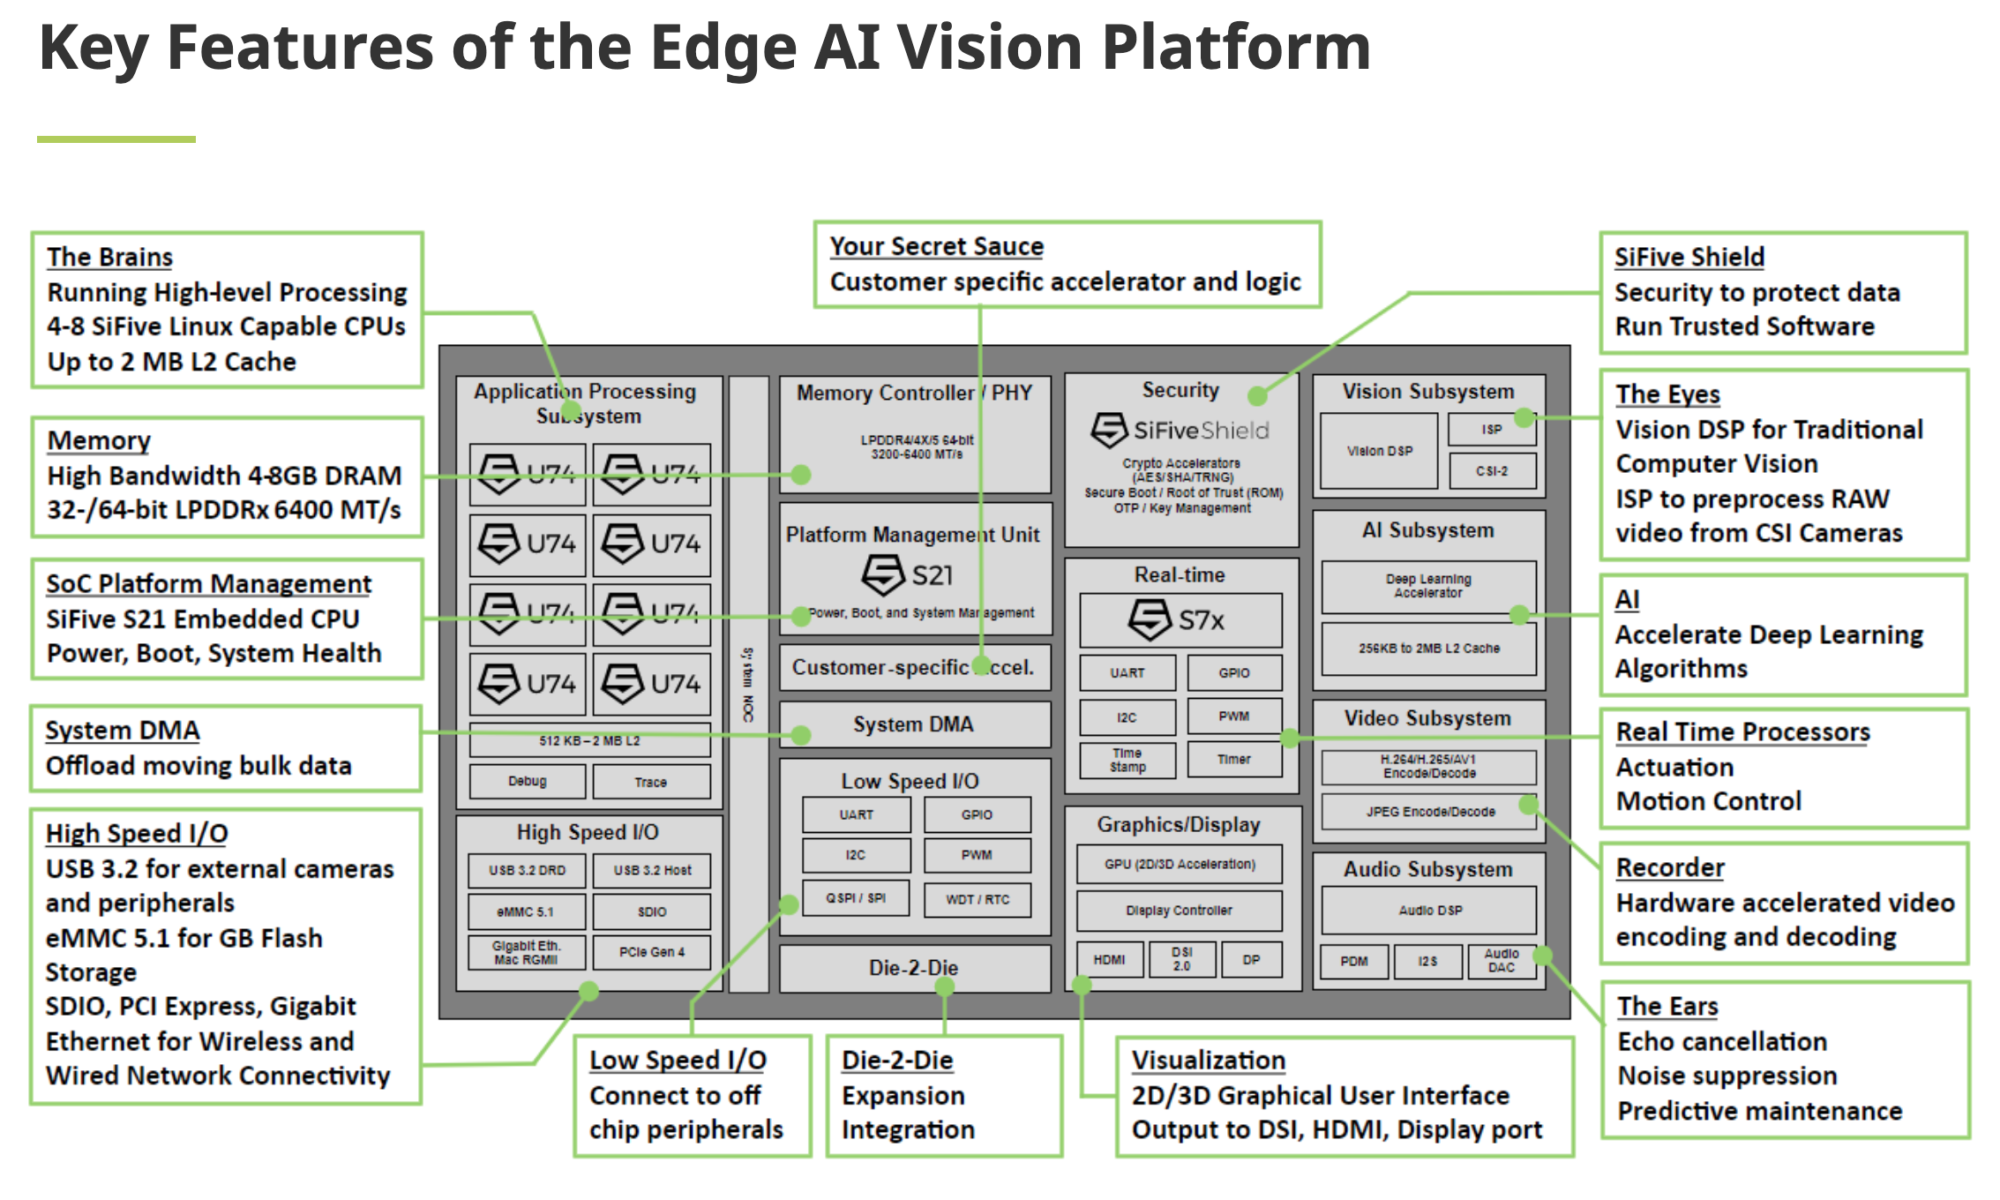 Key Features of the Edge AI Vision Platform